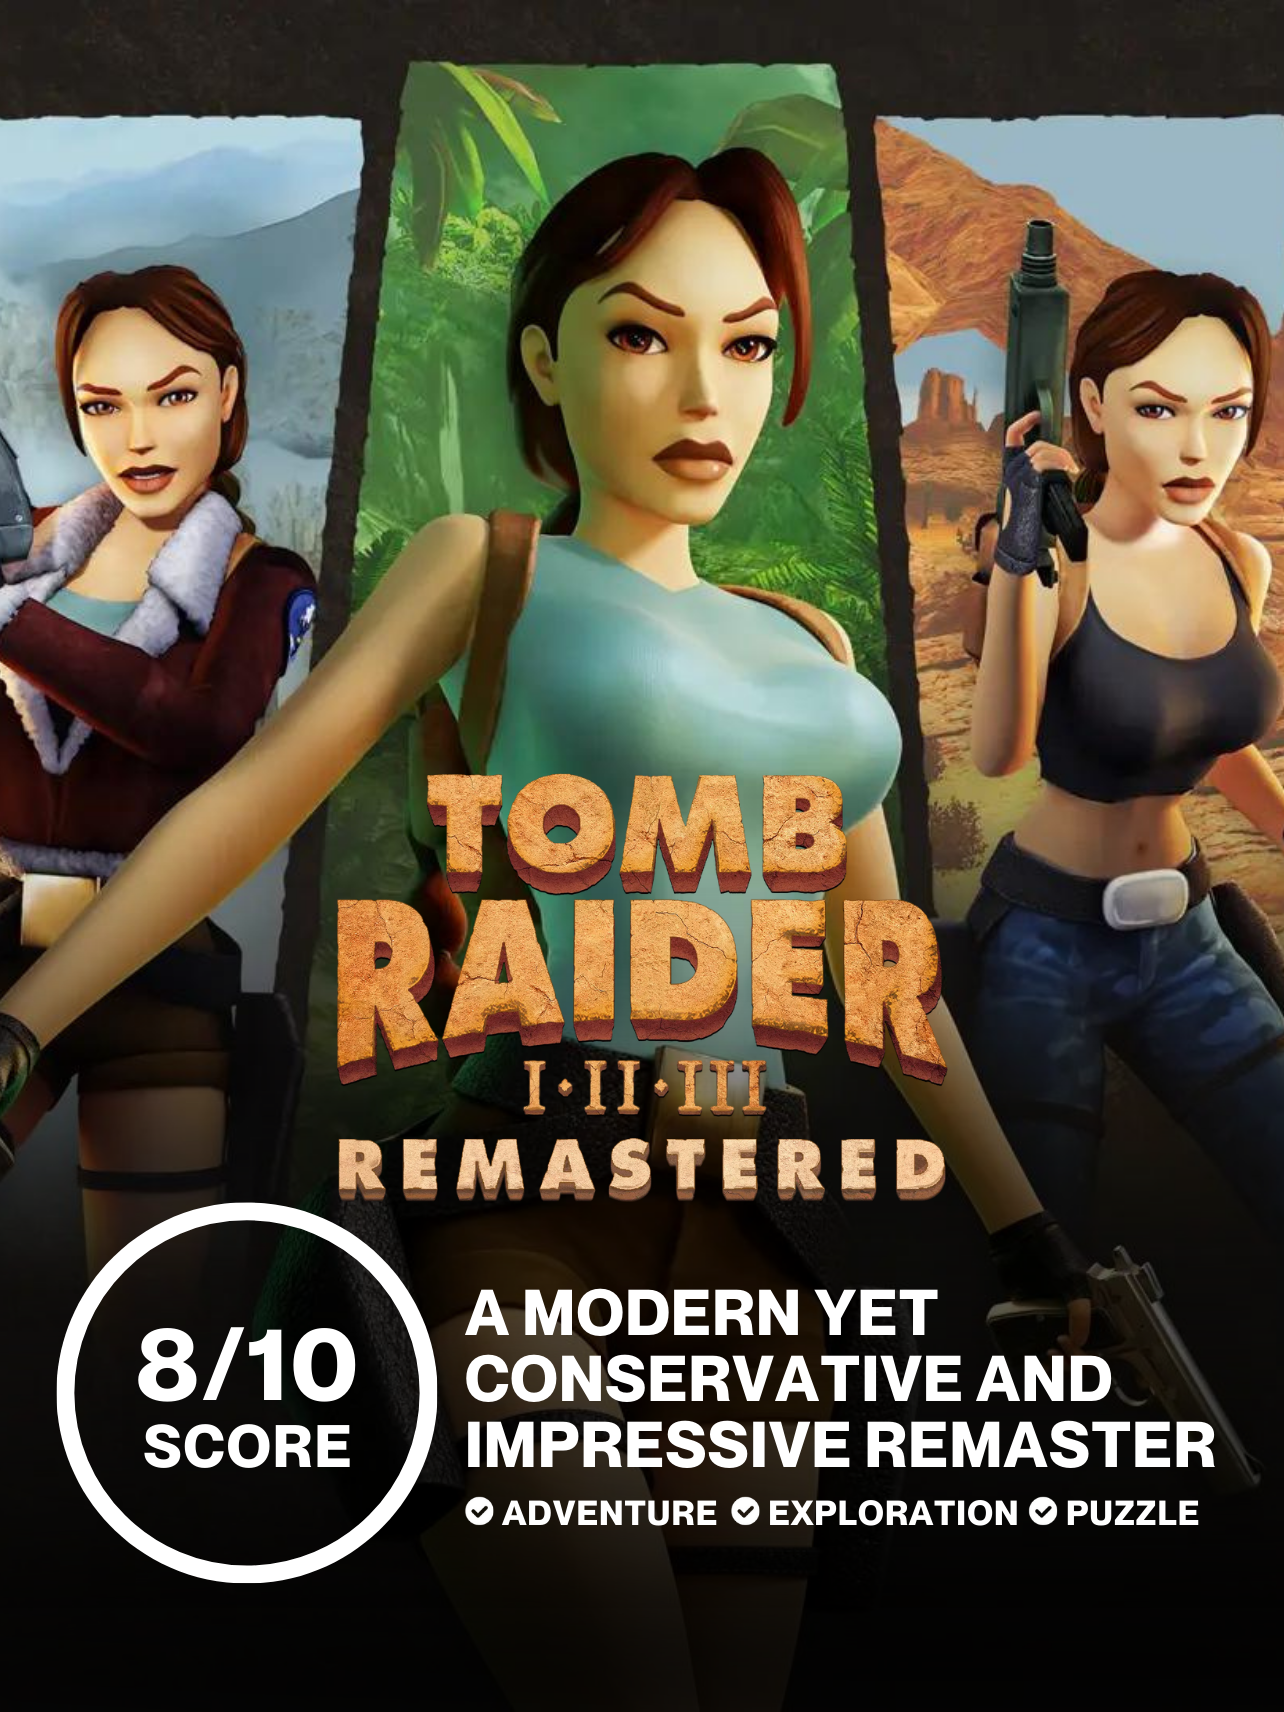 A modern yet conservative and impressive remaster | Review - Tomb Raider I-III Remastered